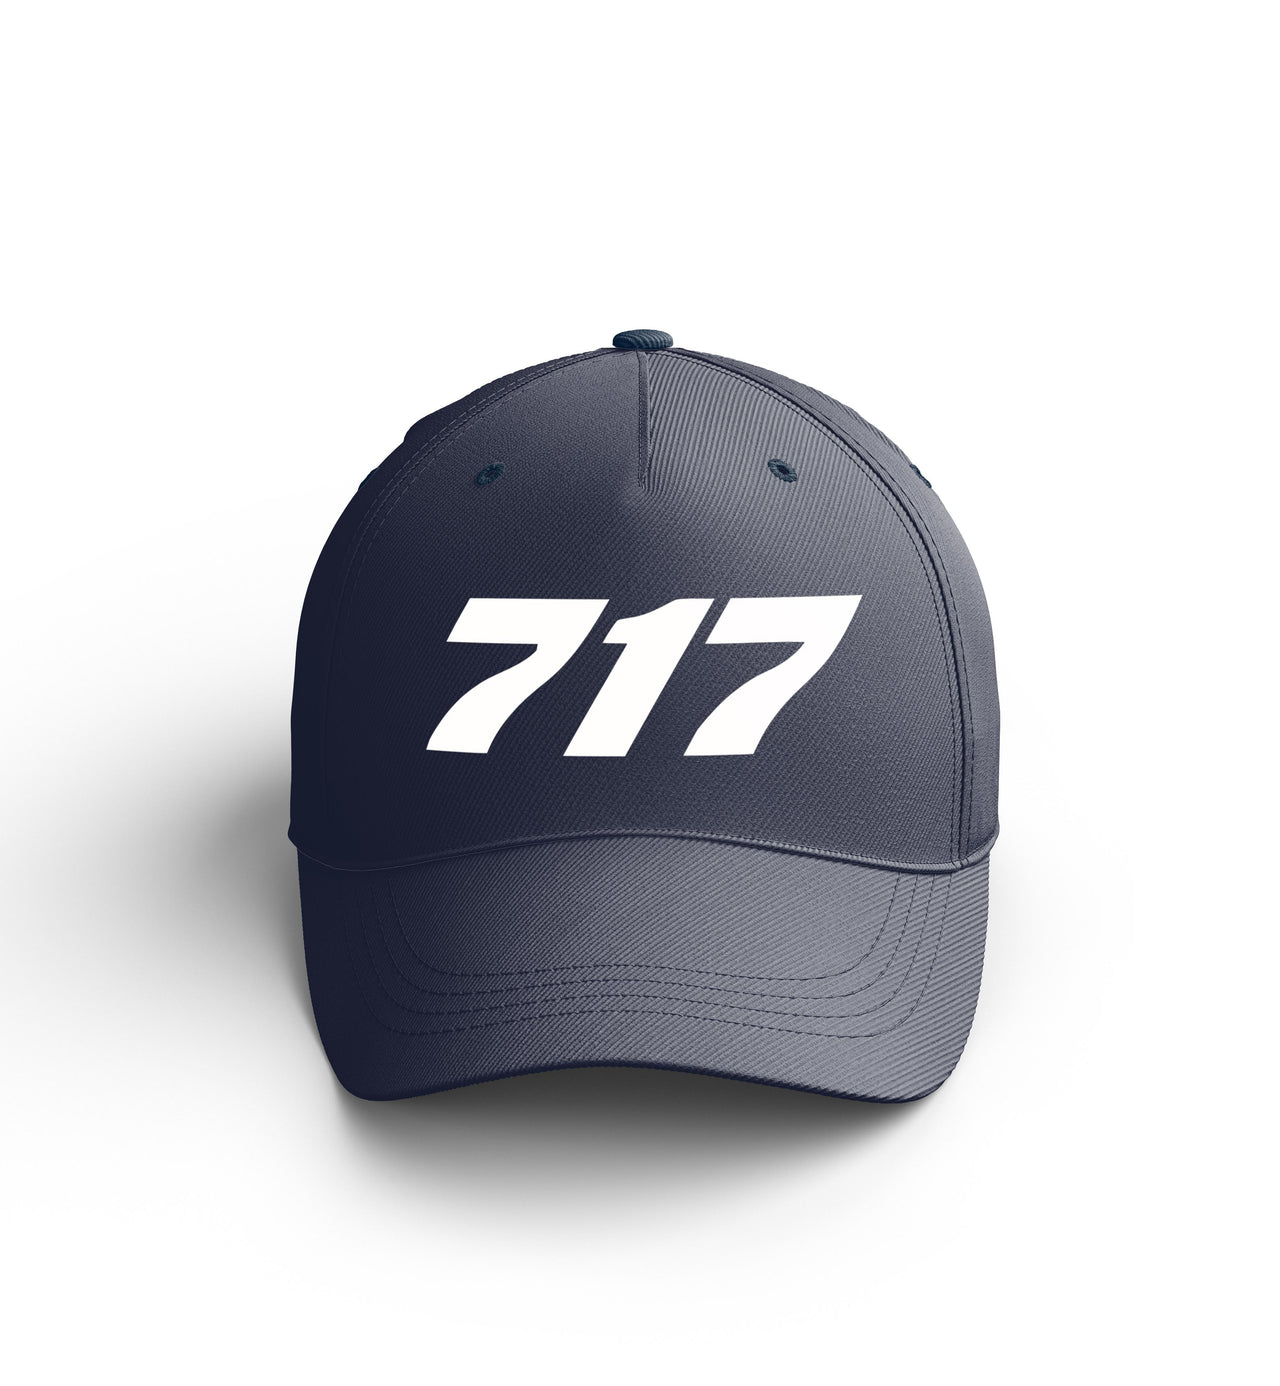 Customizable Name & 717 Flat Text Embroidered Hats